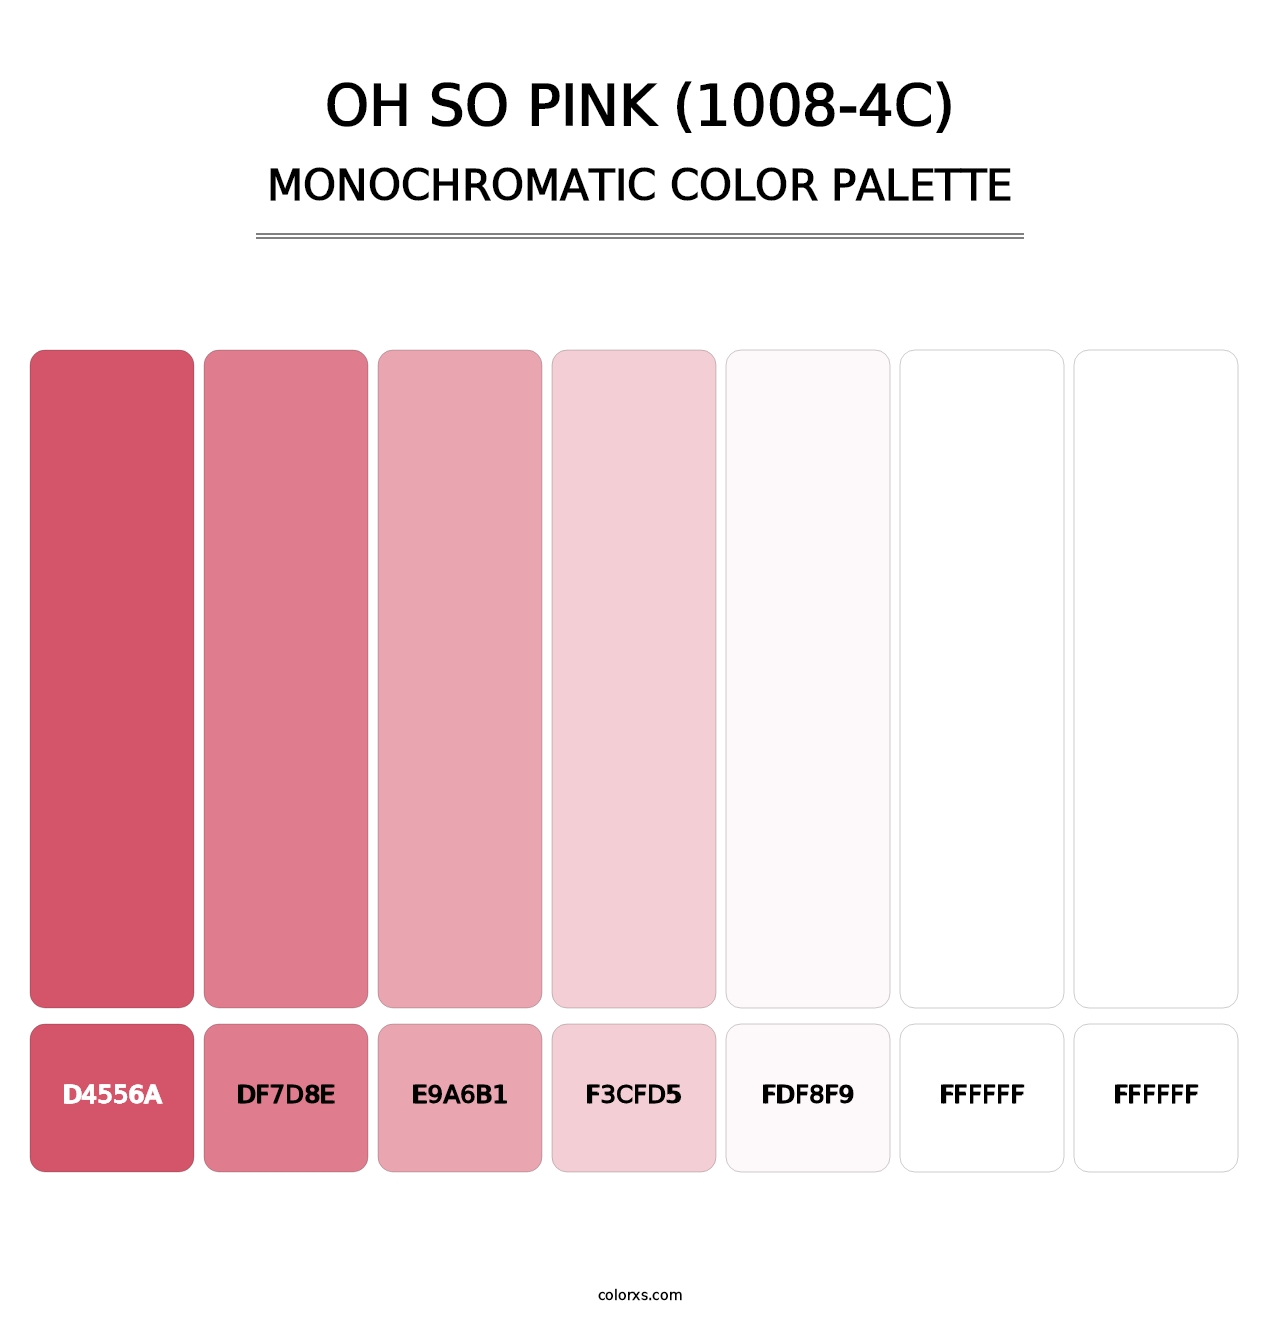 Oh So Pink (1008-4C) - Monochromatic Color Palette